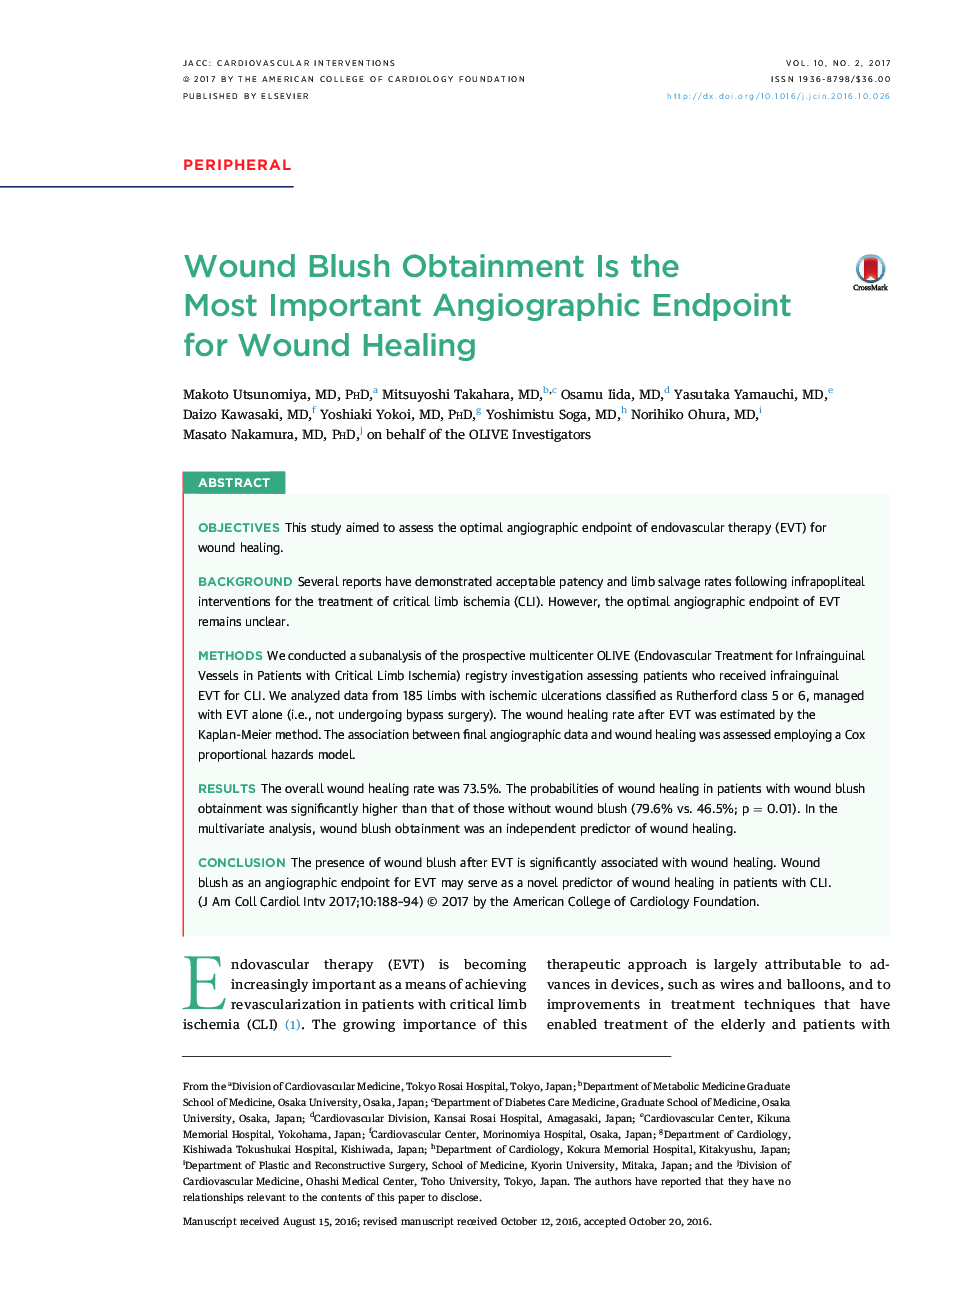 Wound Blush Obtainment Is the MostÂ Important Angiographic Endpoint forÂ Wound Healing